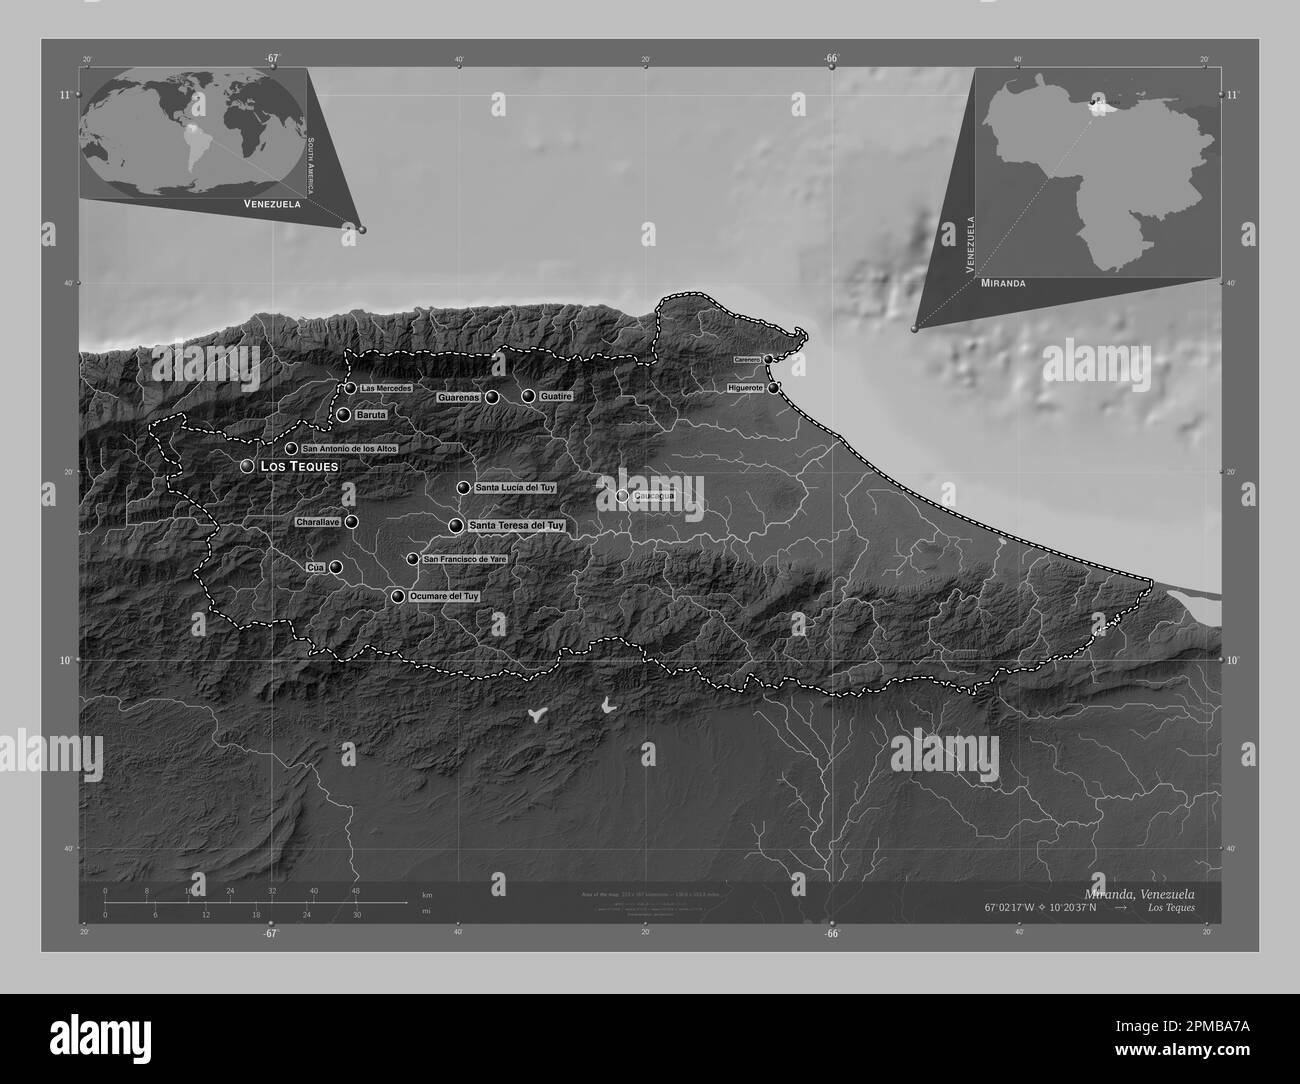 Miranda, state of Venezuela. Grayscale elevation map with lakes and rivers. Locations and names of major cities of the region. Corner auxiliary locati Stock Photo